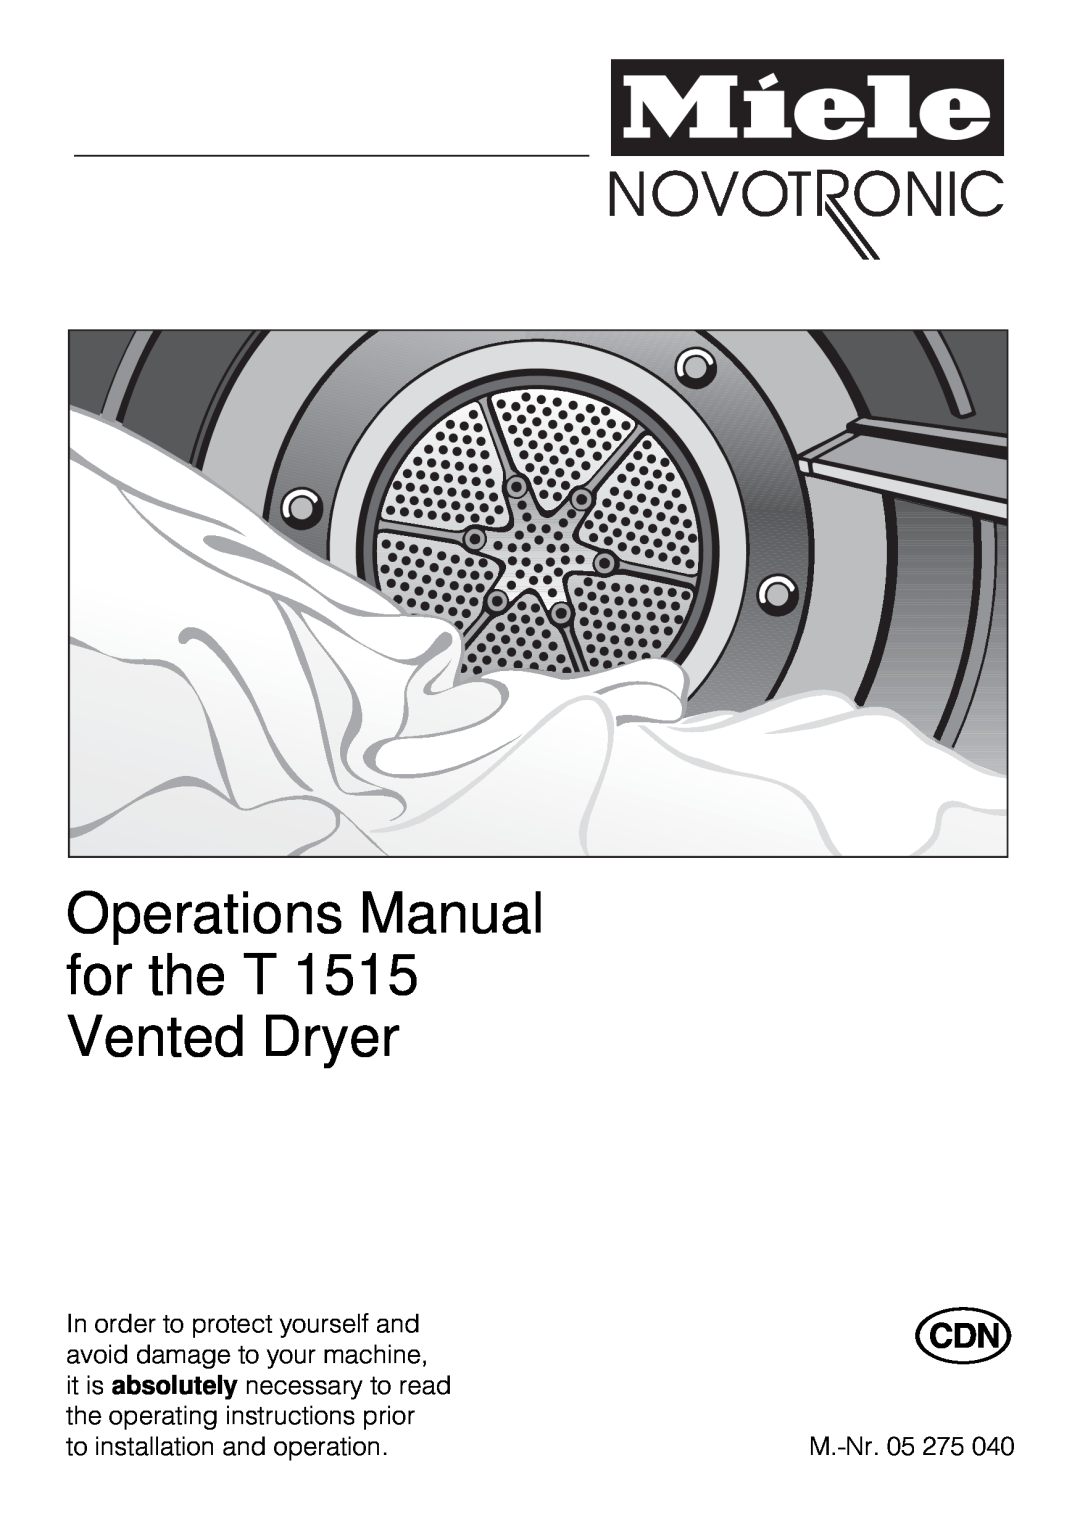 Miele operating instructions Operations Manual for the T 1515 Vented Dryer, M.-Nr. 05 275 